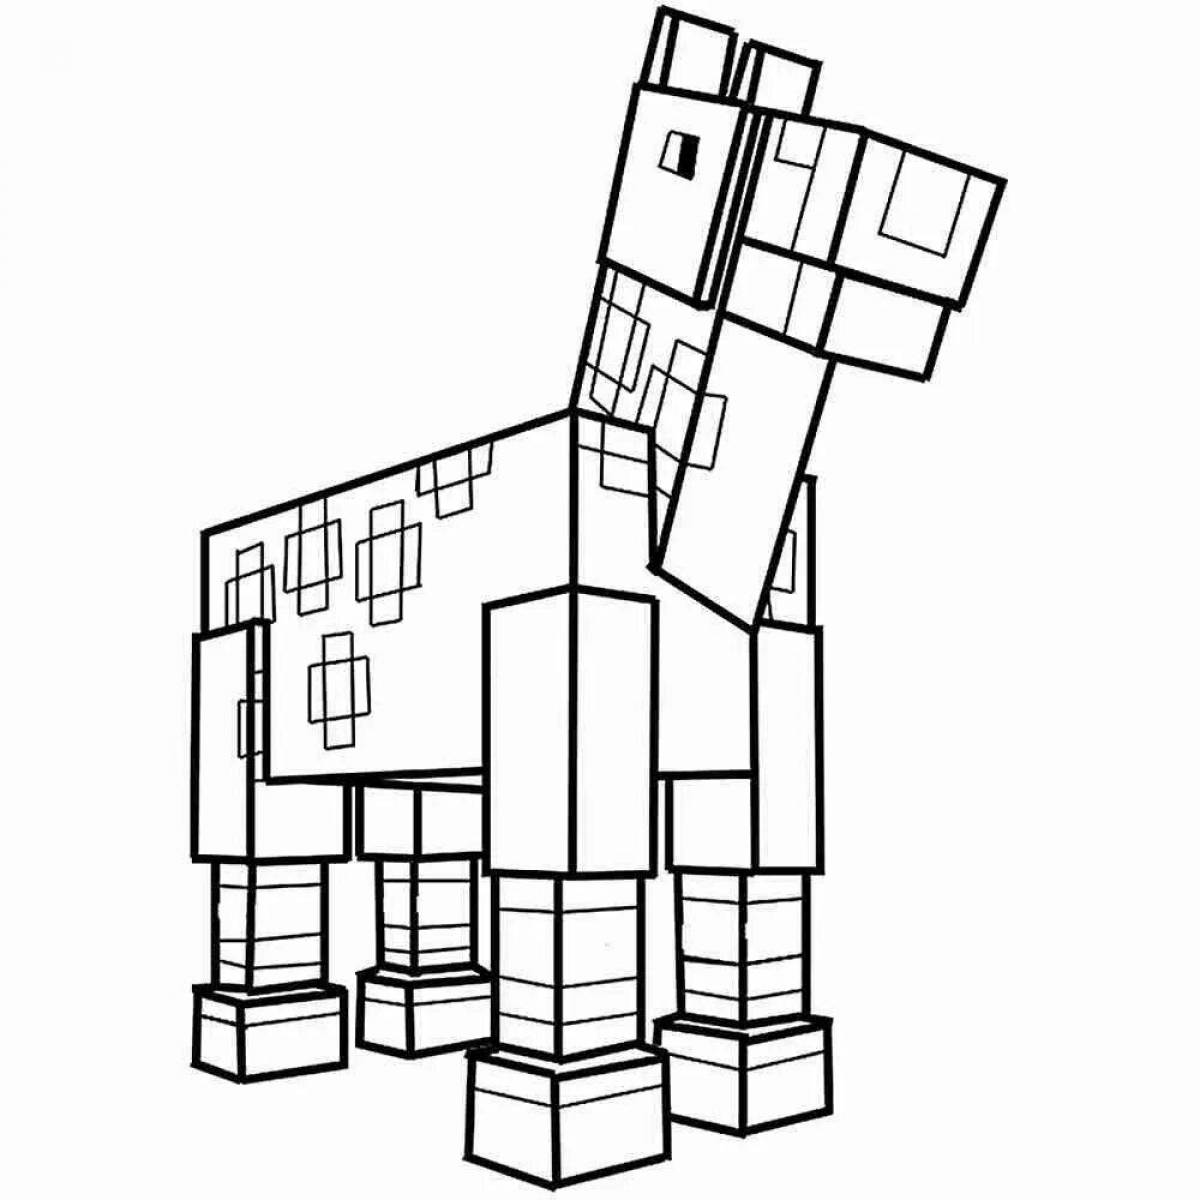 Vibrant minecraft horse coloring page